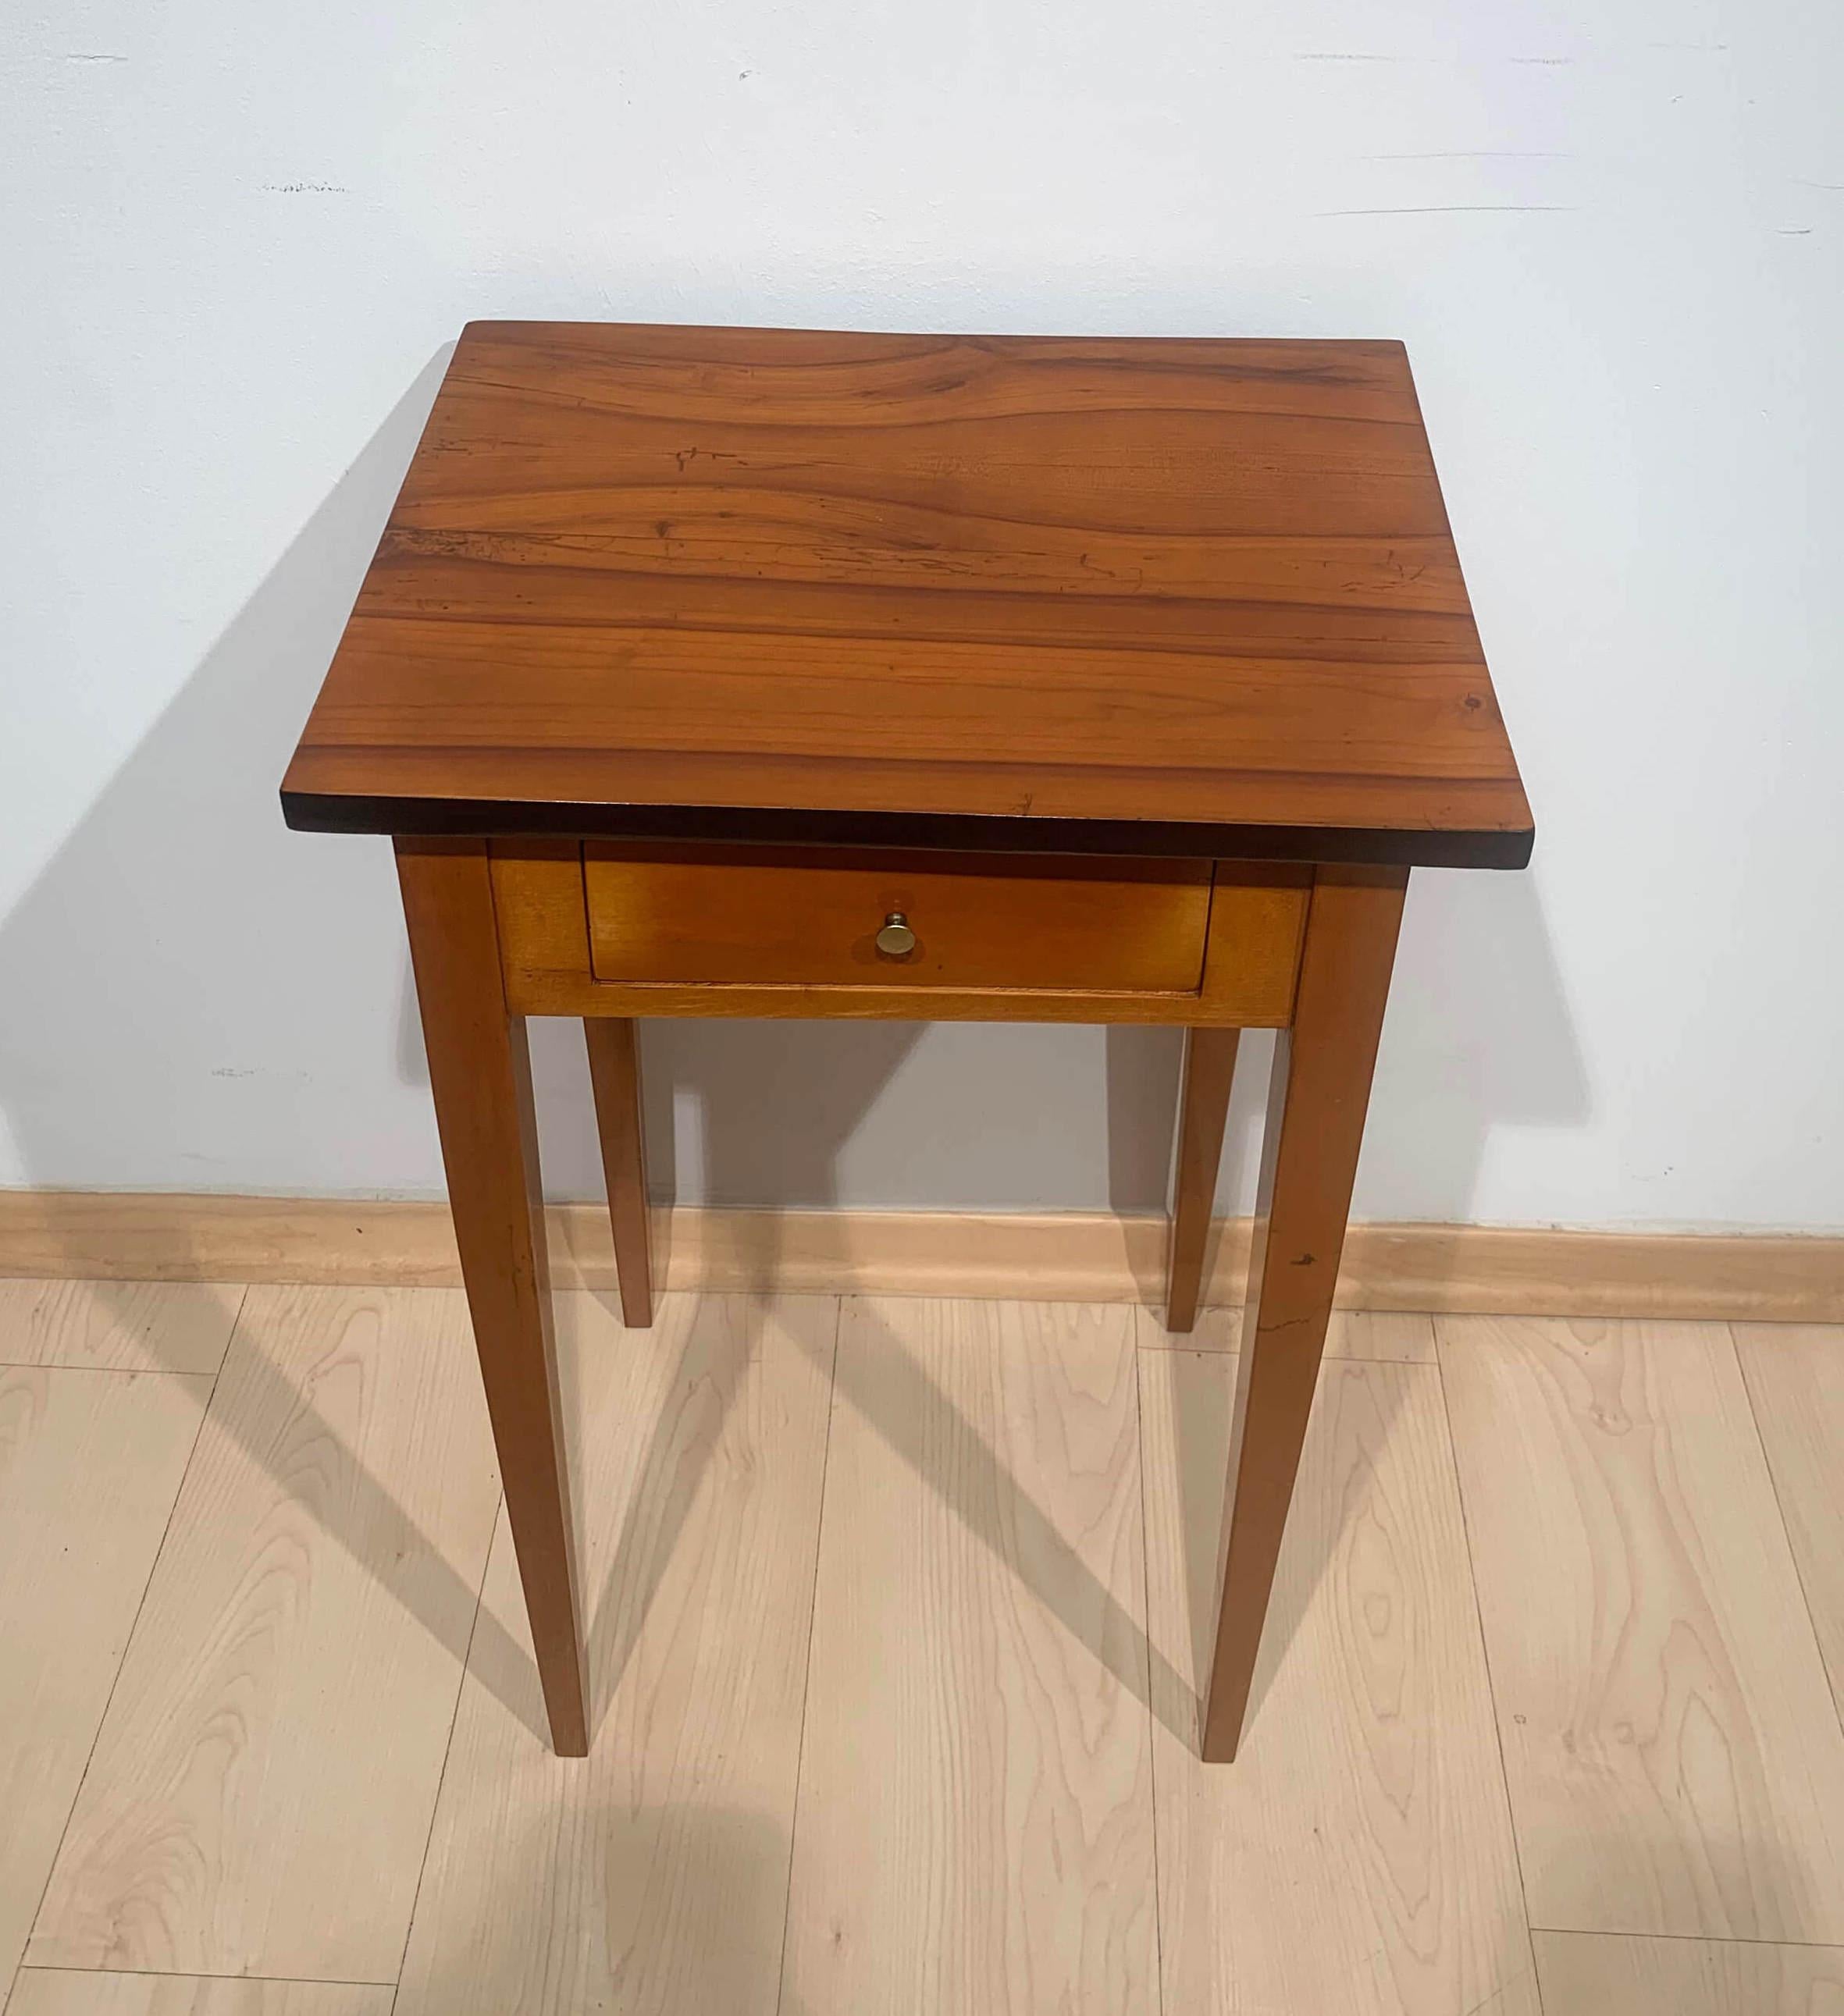 Polished Biedermeier Side Table with Drawer, Cherry Wood, South Germany, circa 1830